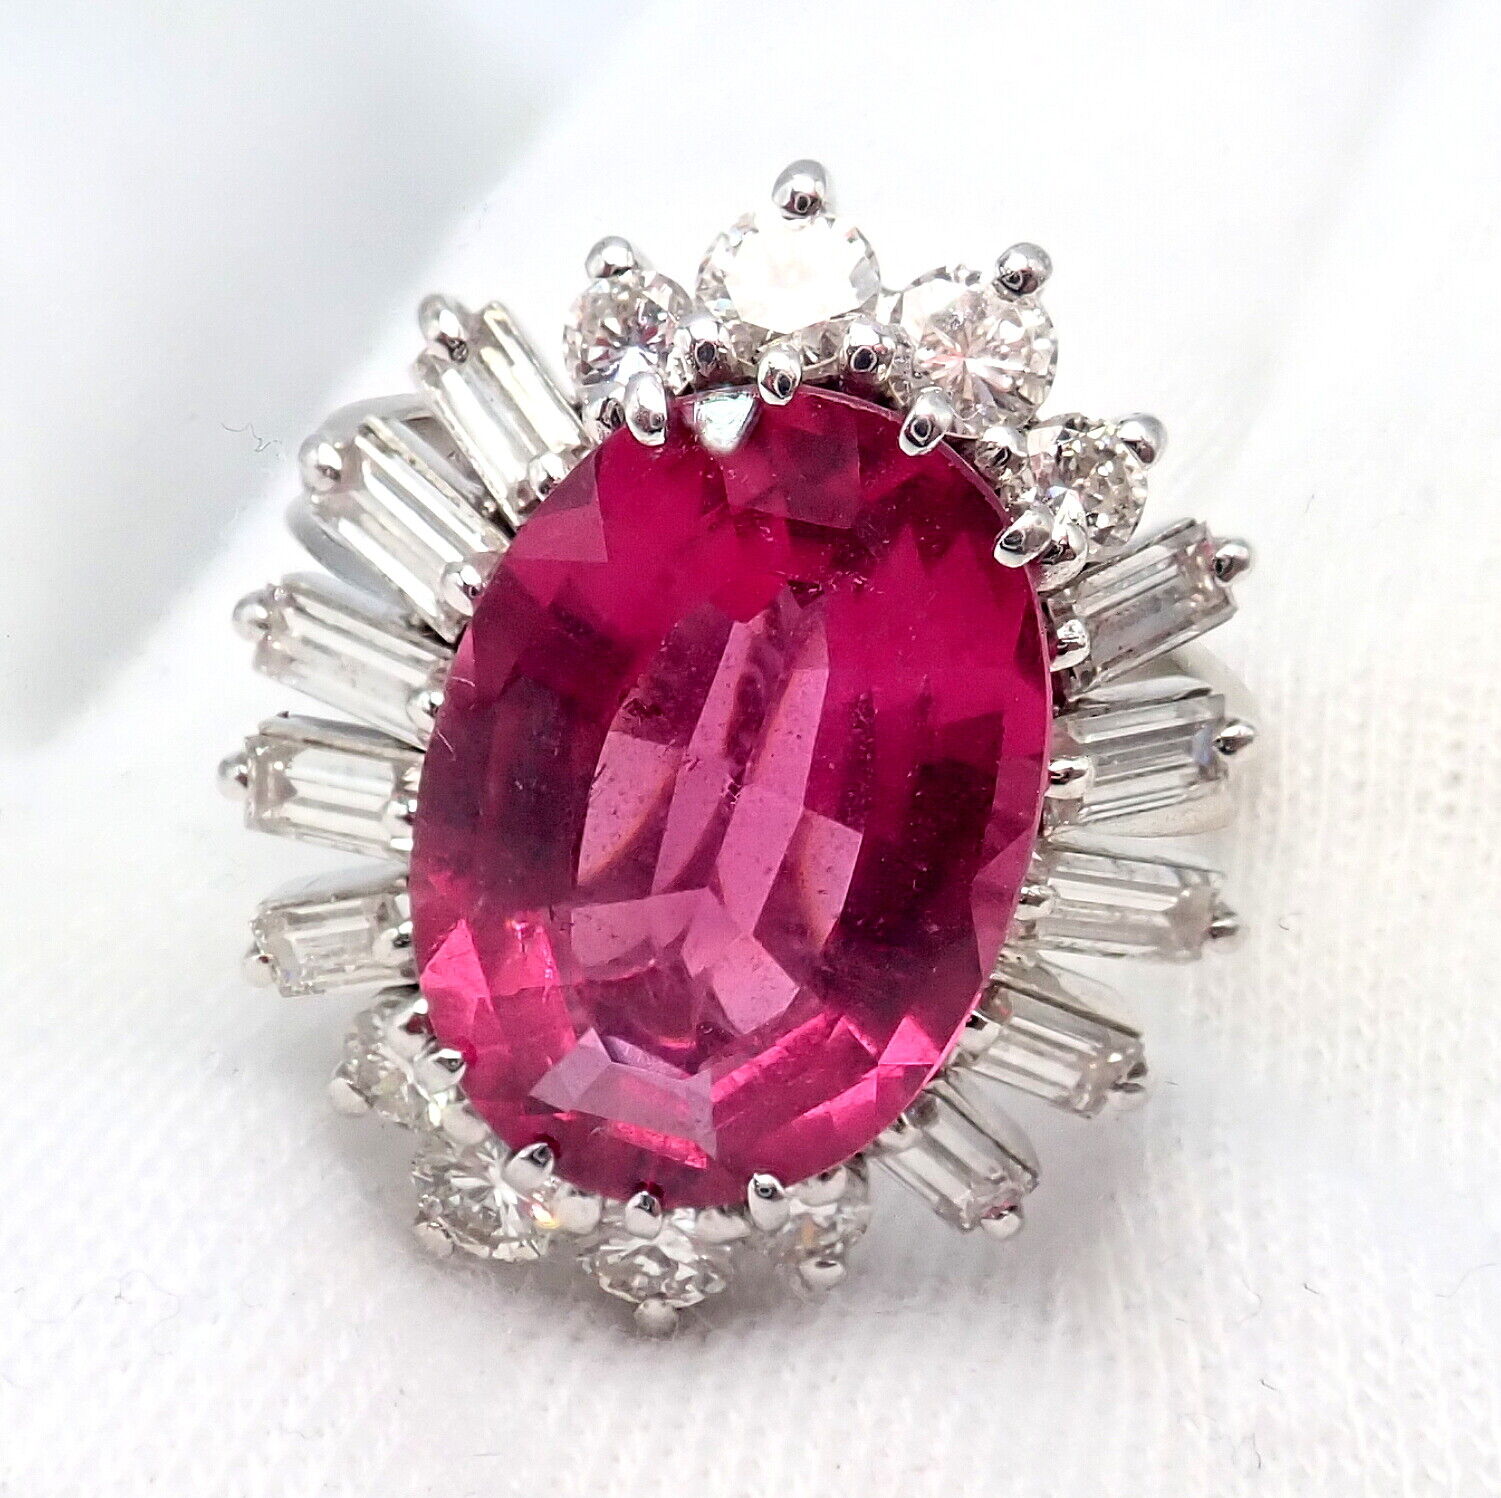 H. Stern Jewelry & Watches:Fine Jewelry:Jewelry Sets Authentic! H. Stern 18k White Gold Diamond Pink Tourmaline Ring + Earrings Set